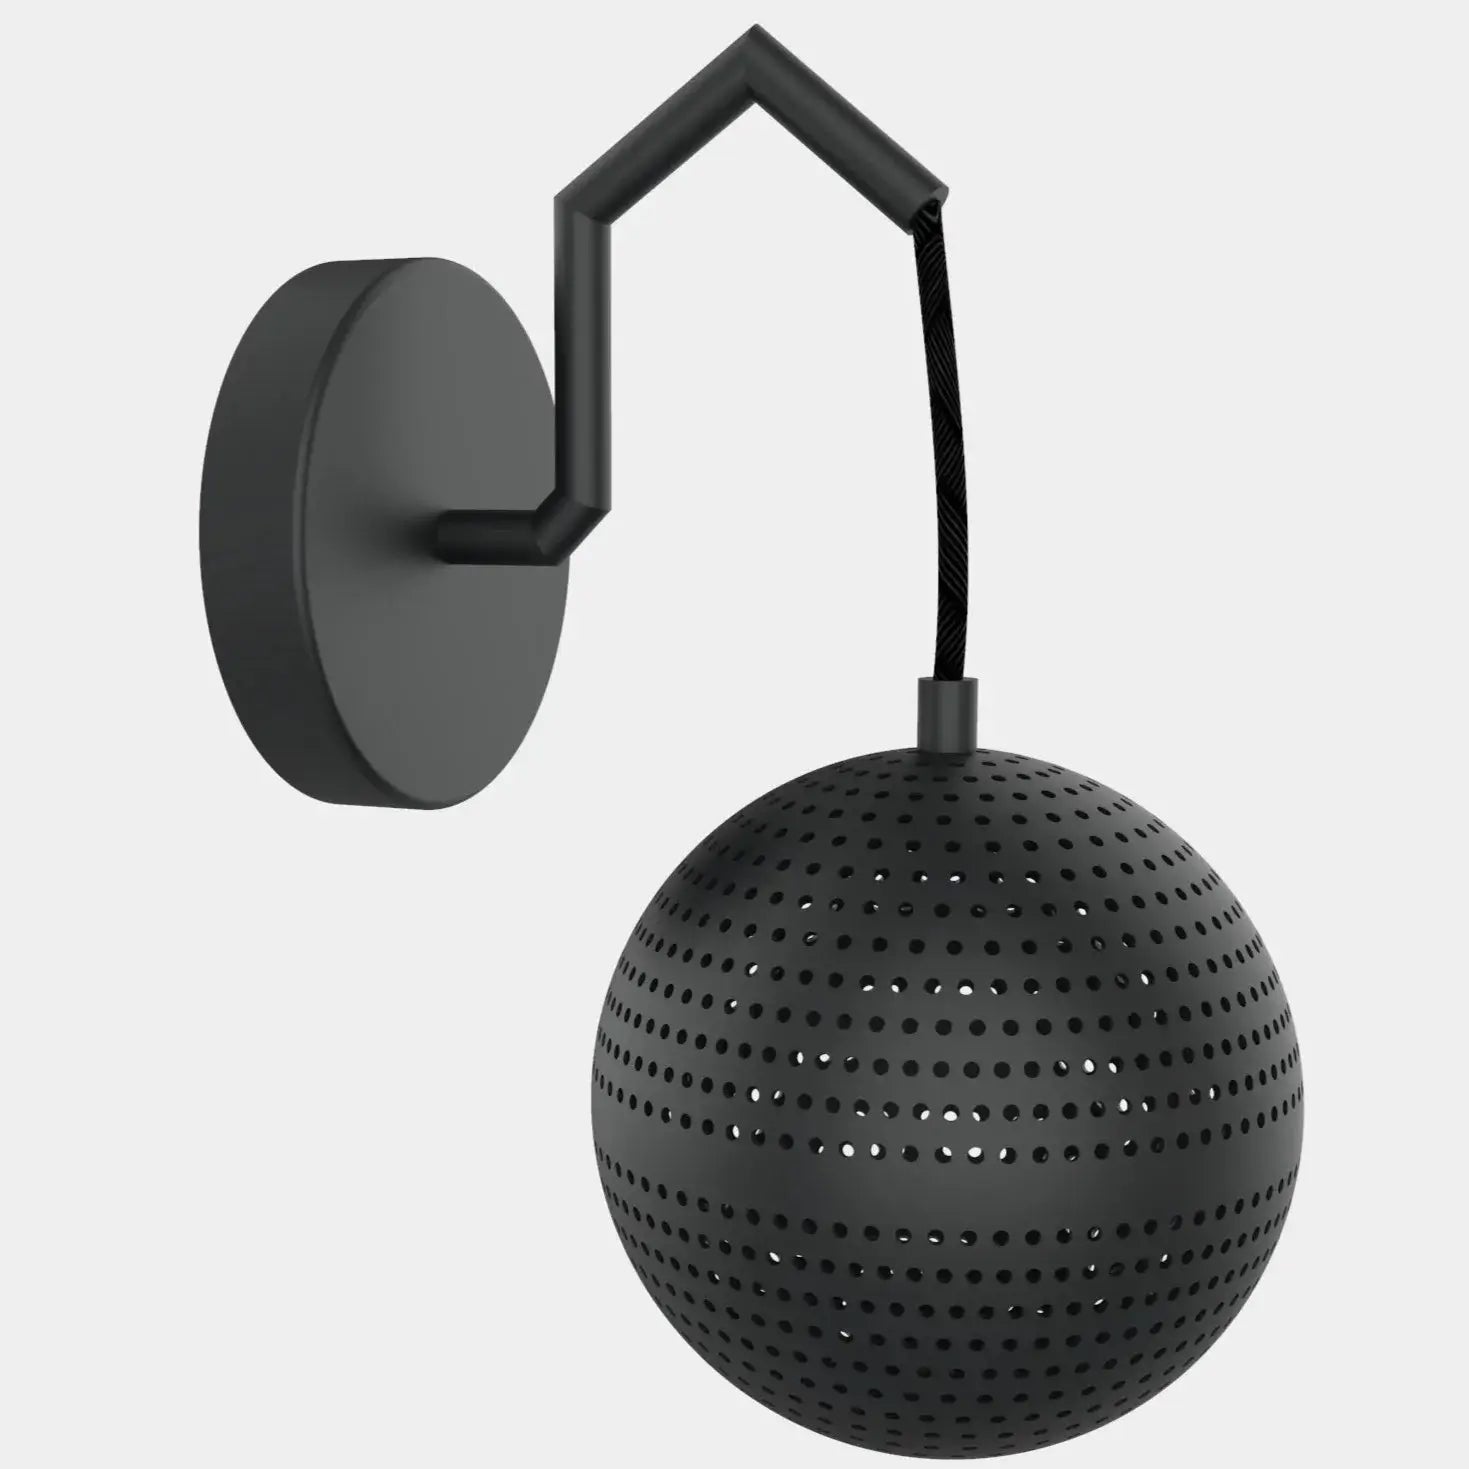 Dounia home Wall sconce in Black made of Metal, Model: Amur